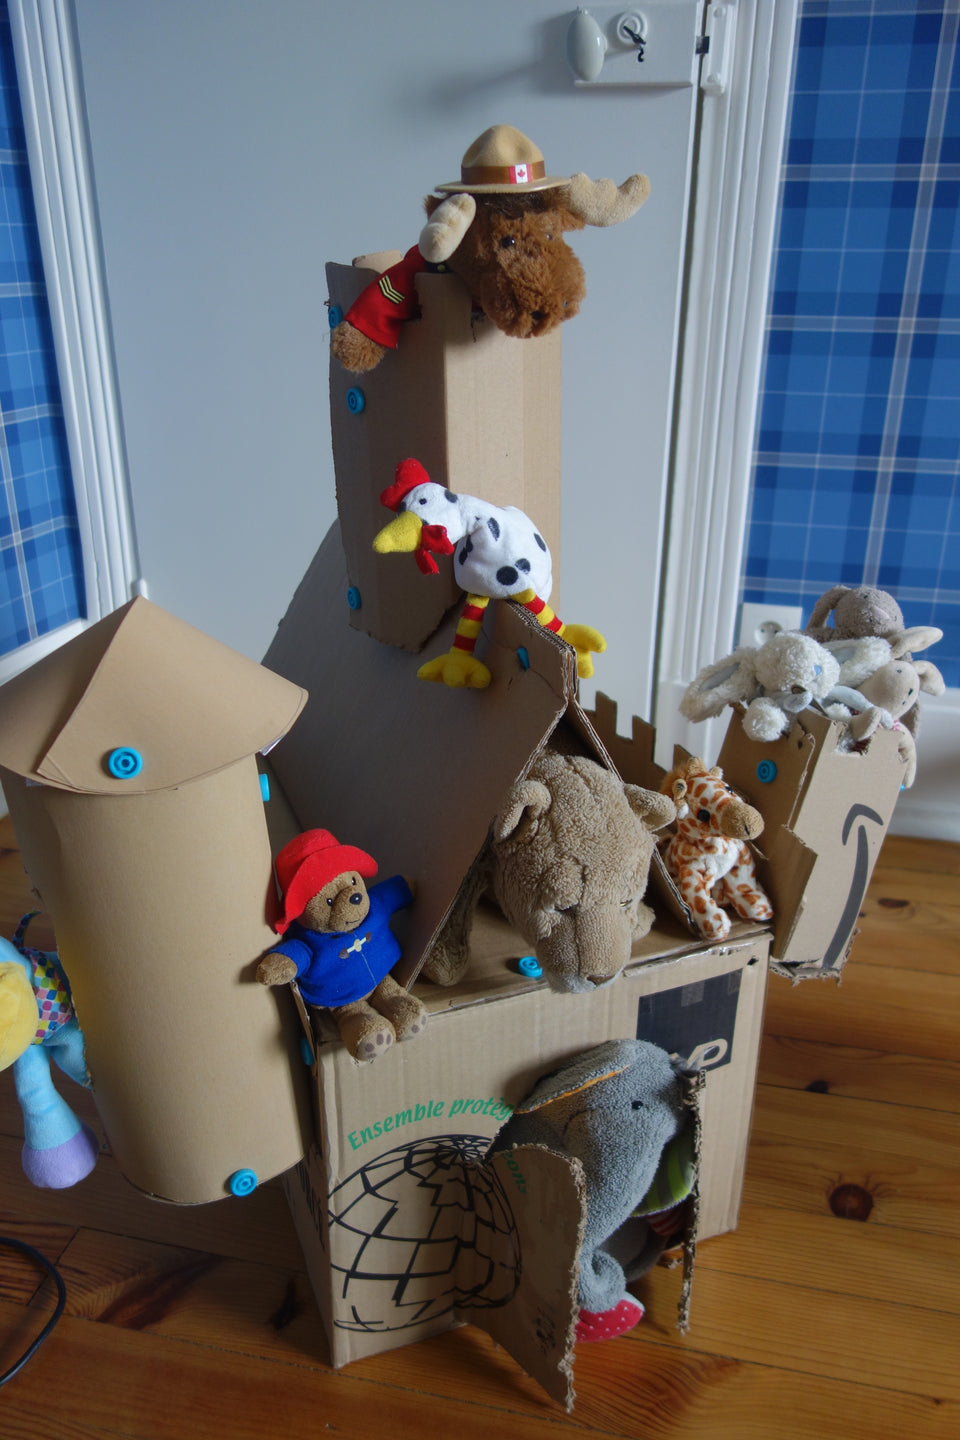 Castle for soft toys made with Makedo cardboard construction tools